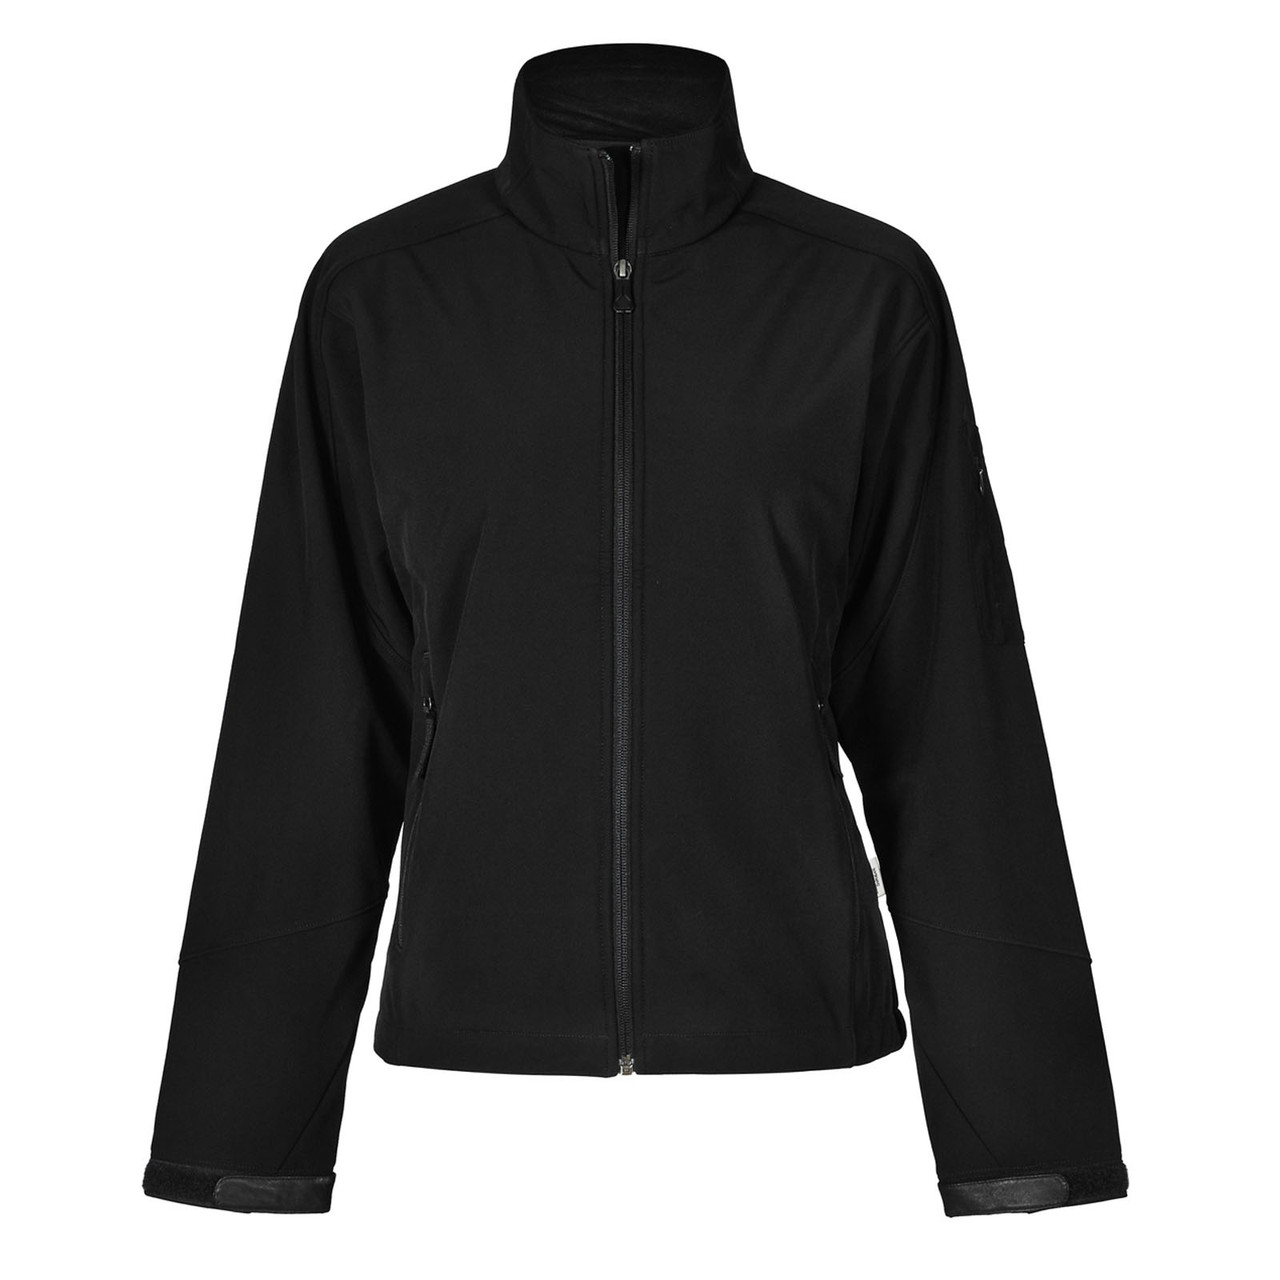 Ladies Stretchy Softshell High-Tech Jacket | Shop Winter Jackets Online